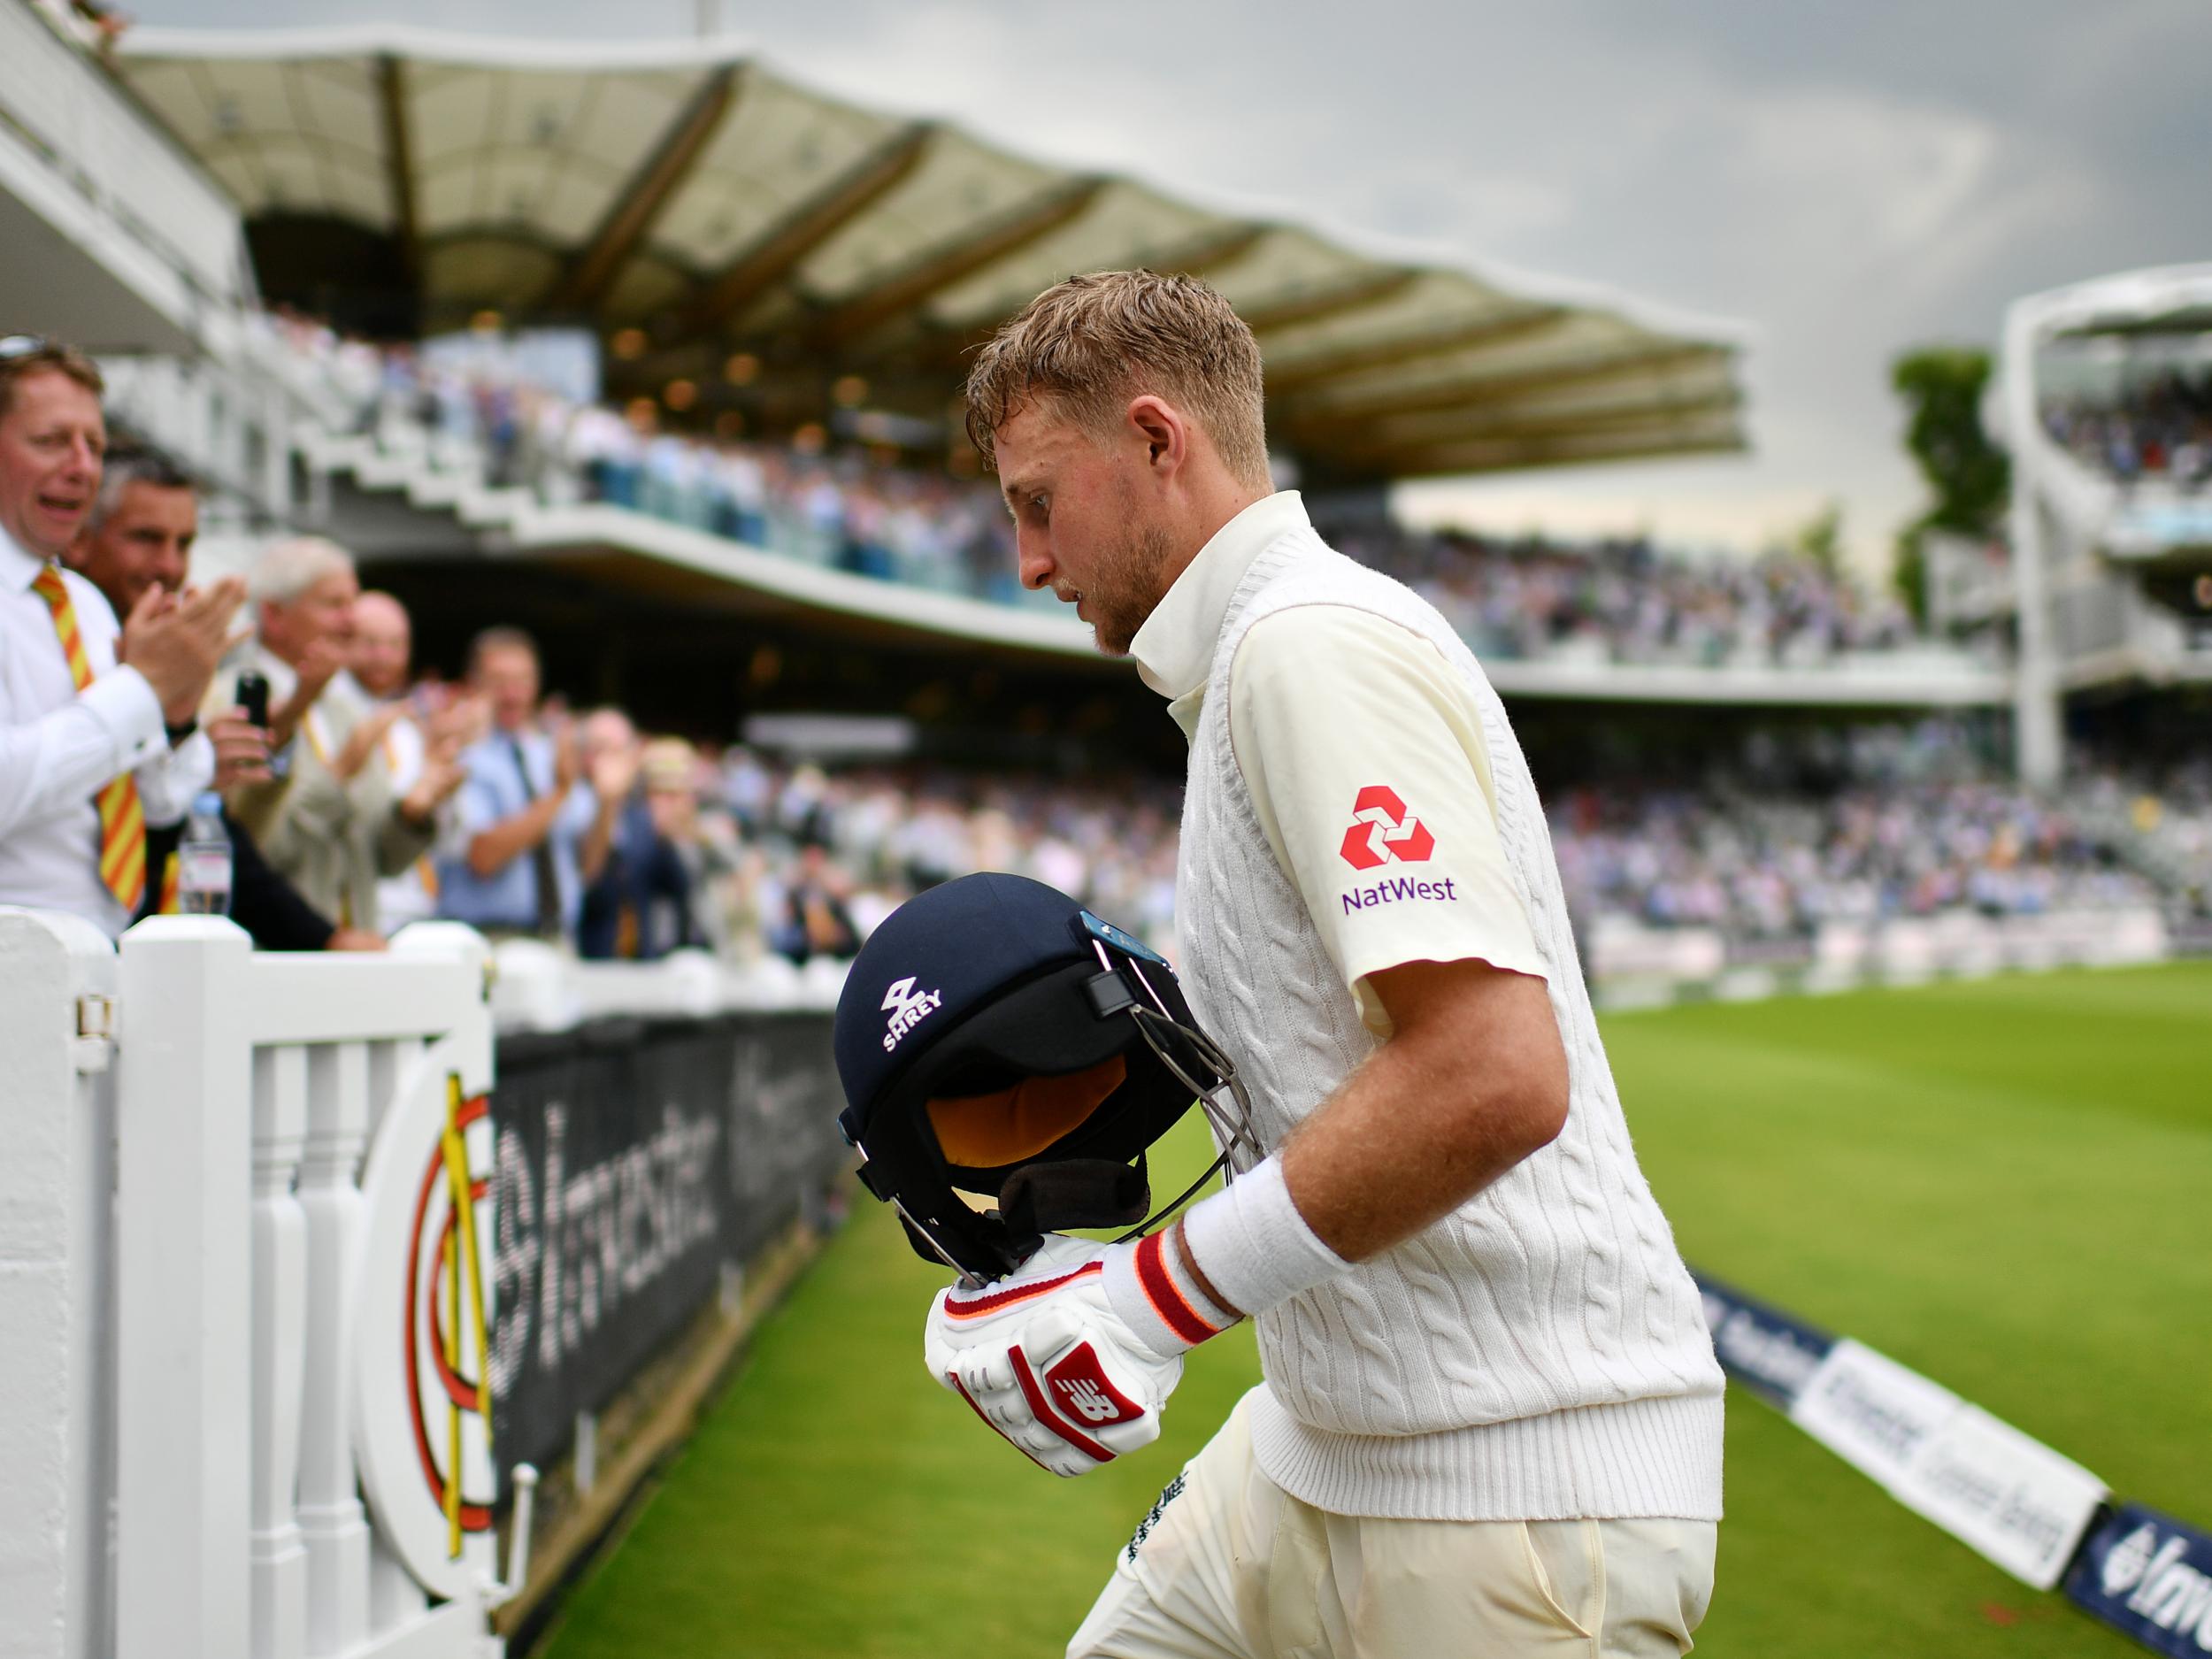 Root was the hero of day one at Lord's